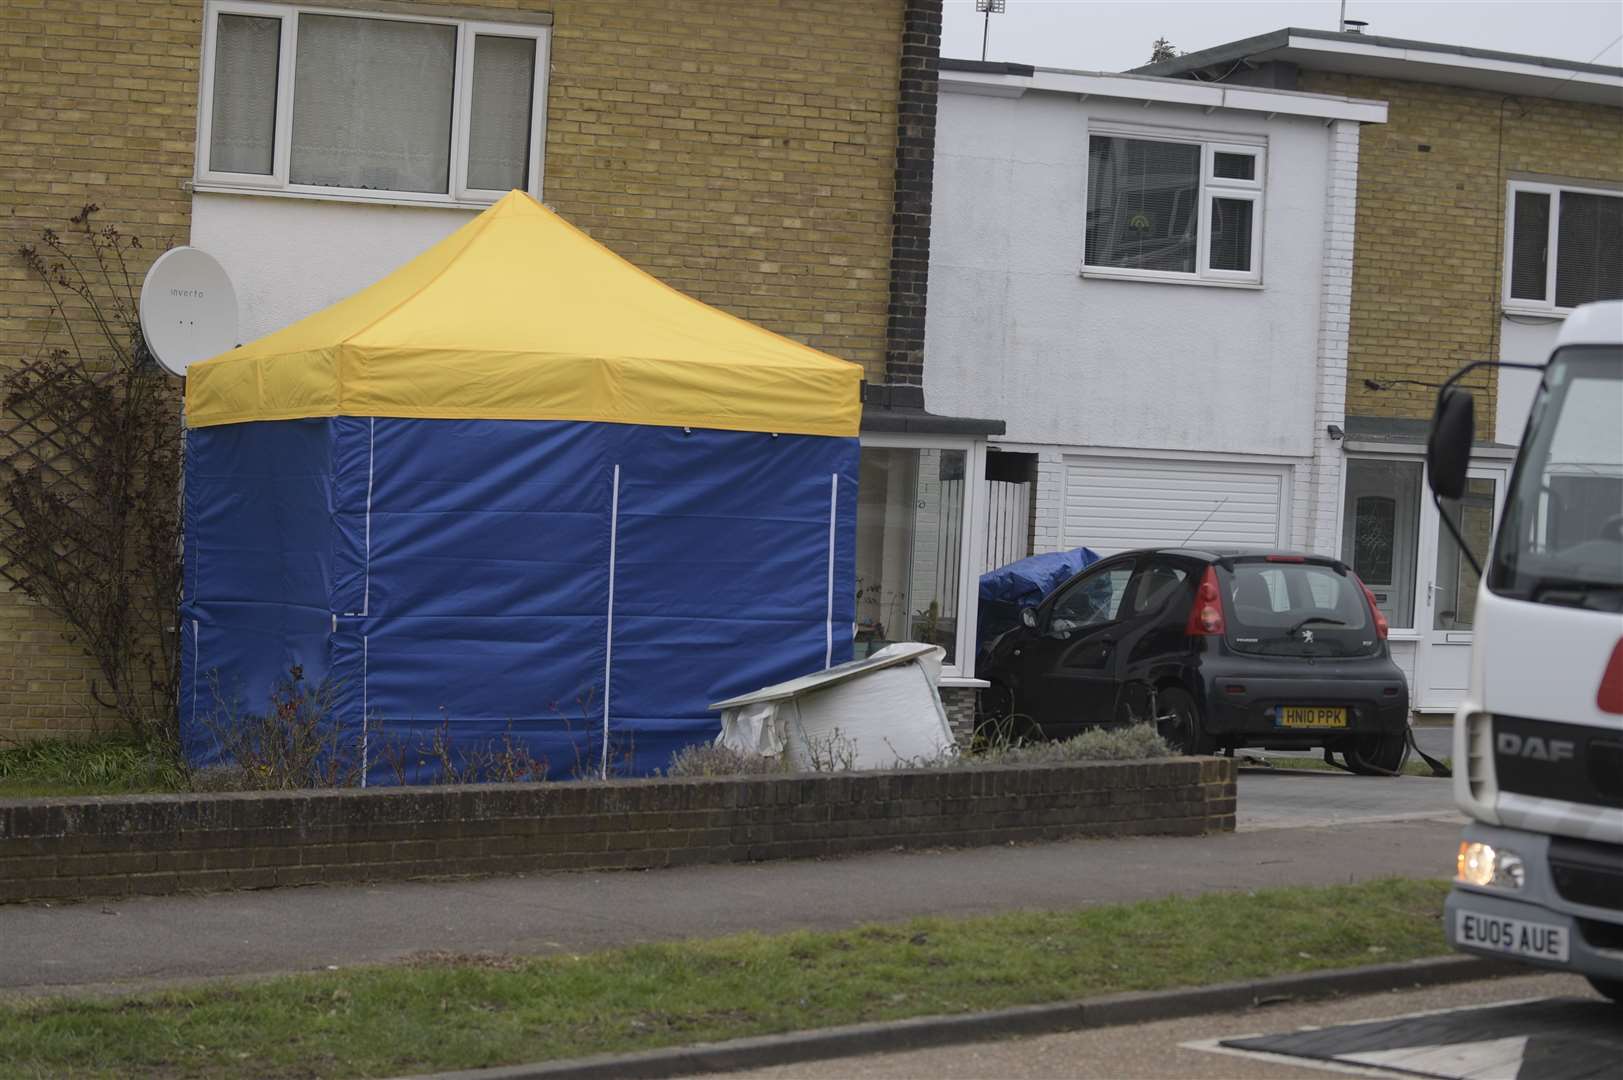 A home in Freemens Way in Deal was searched as part of the investigation